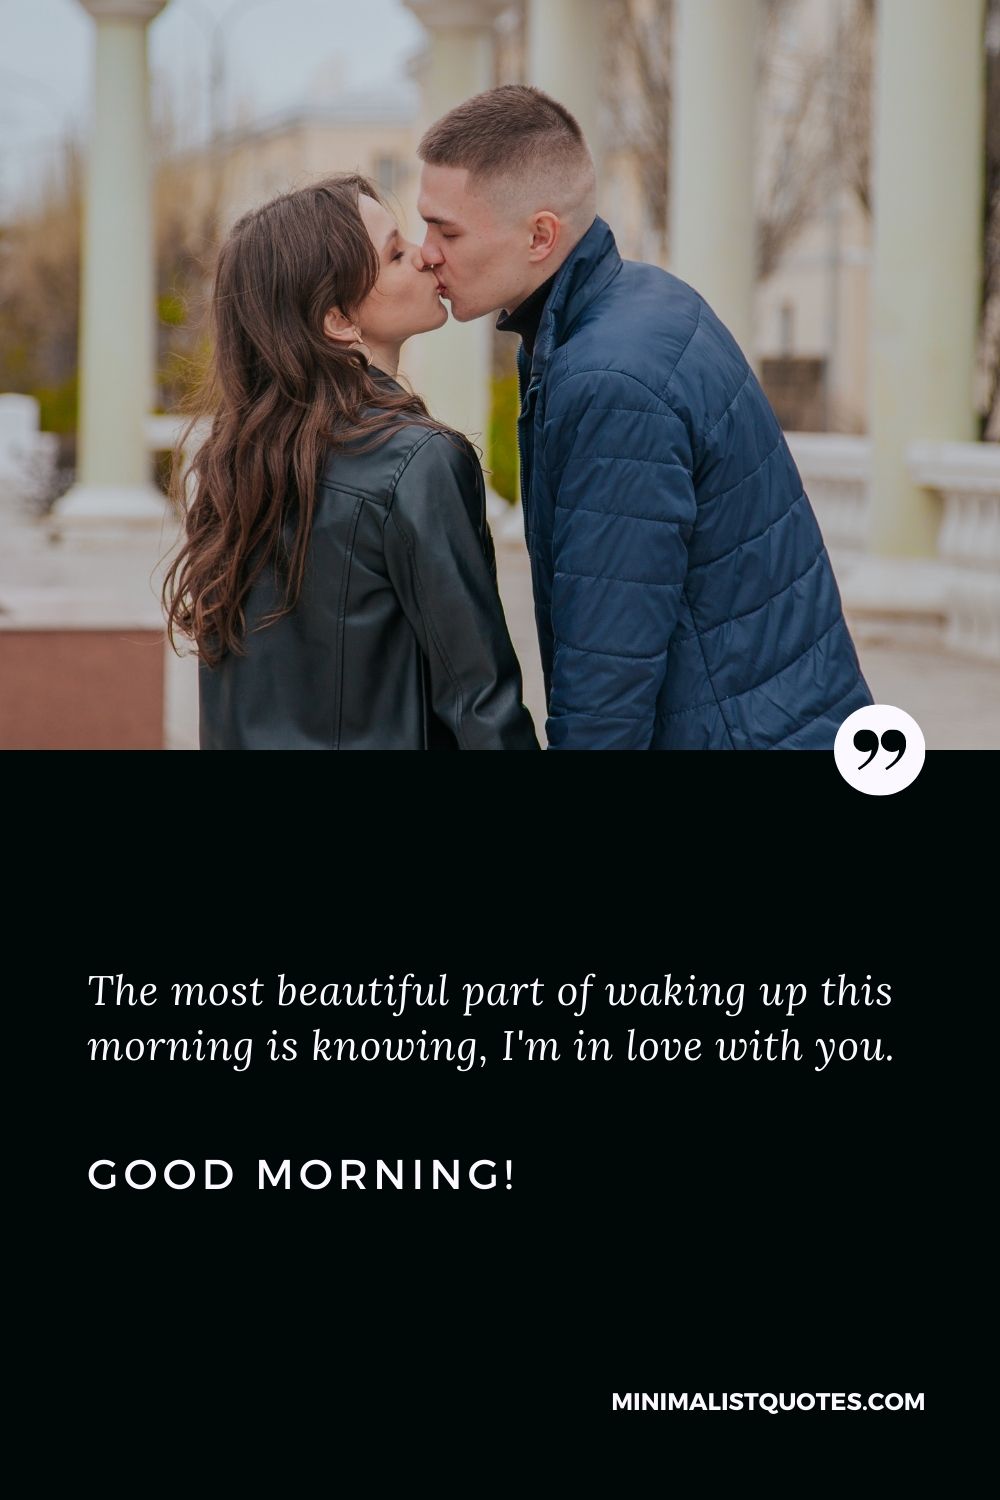 Romantic good morning message for him: The most beautiful part of waking up this morning is knowing, I'm in love with you. Good Morning!